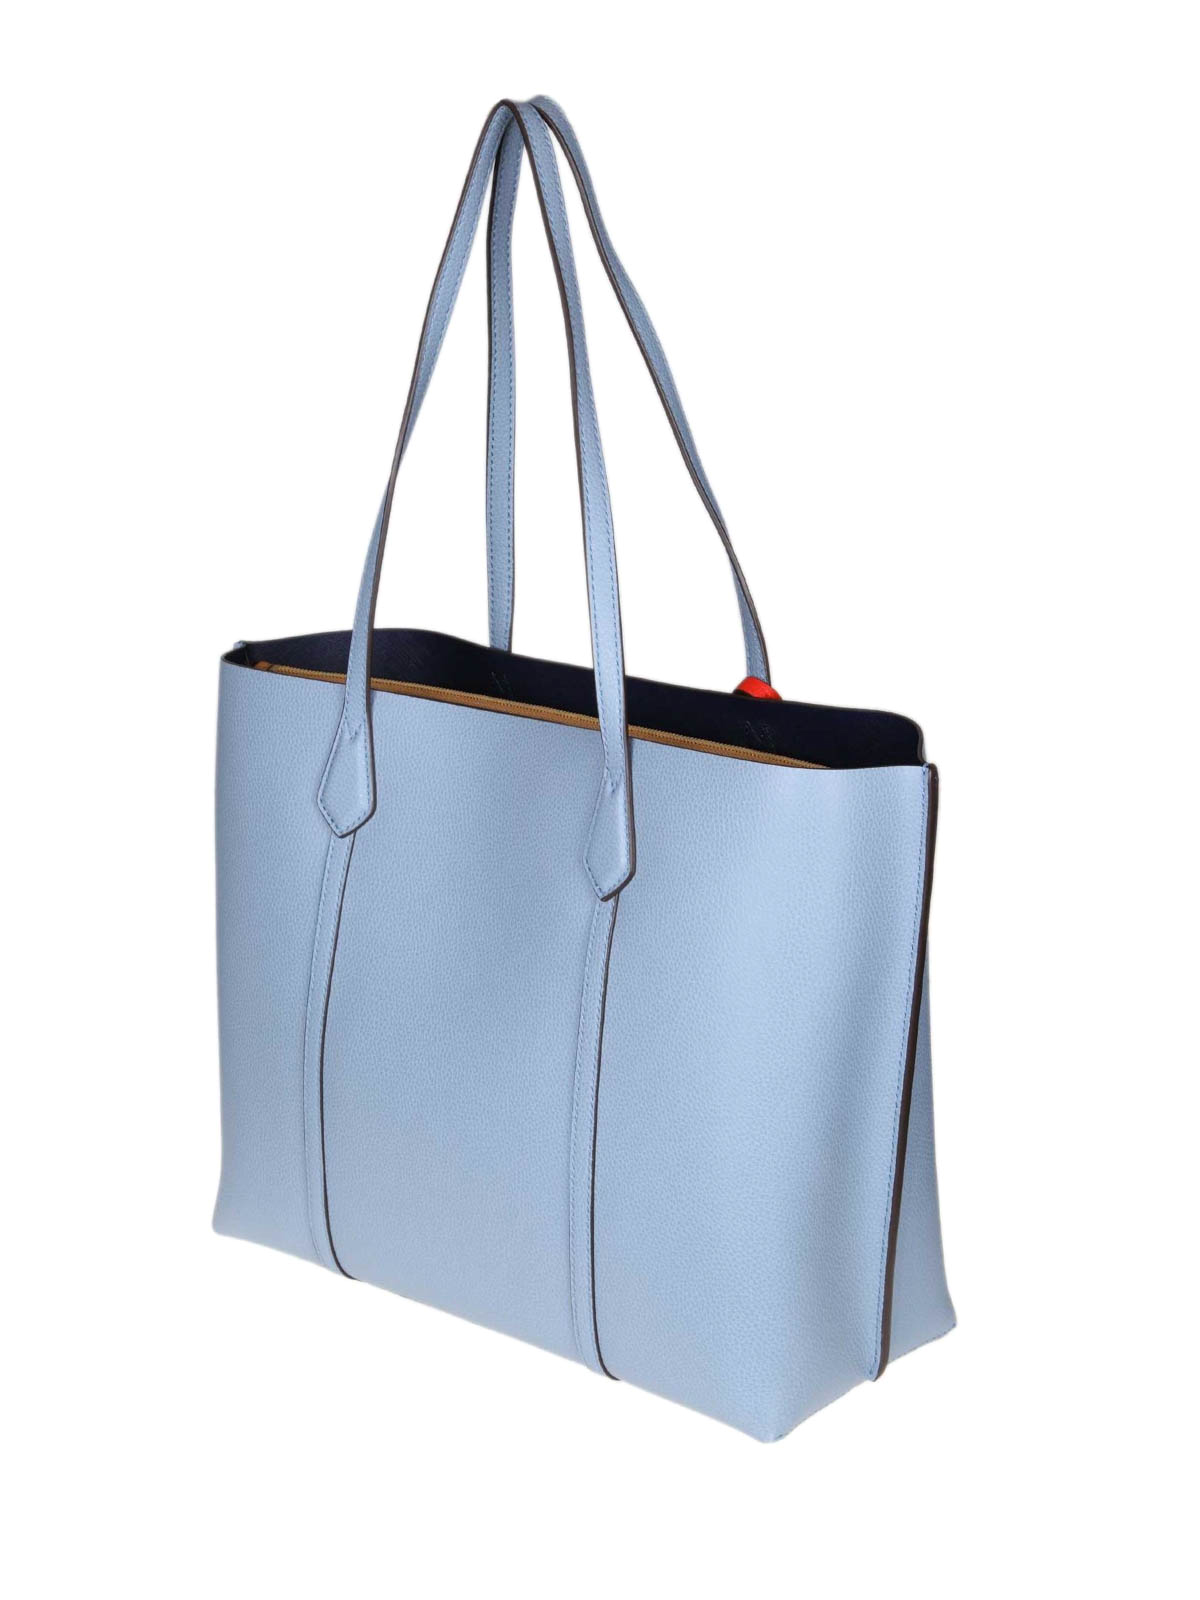 Totes bags Tory Burch - Perry triple compartment light blue tote - 53245432